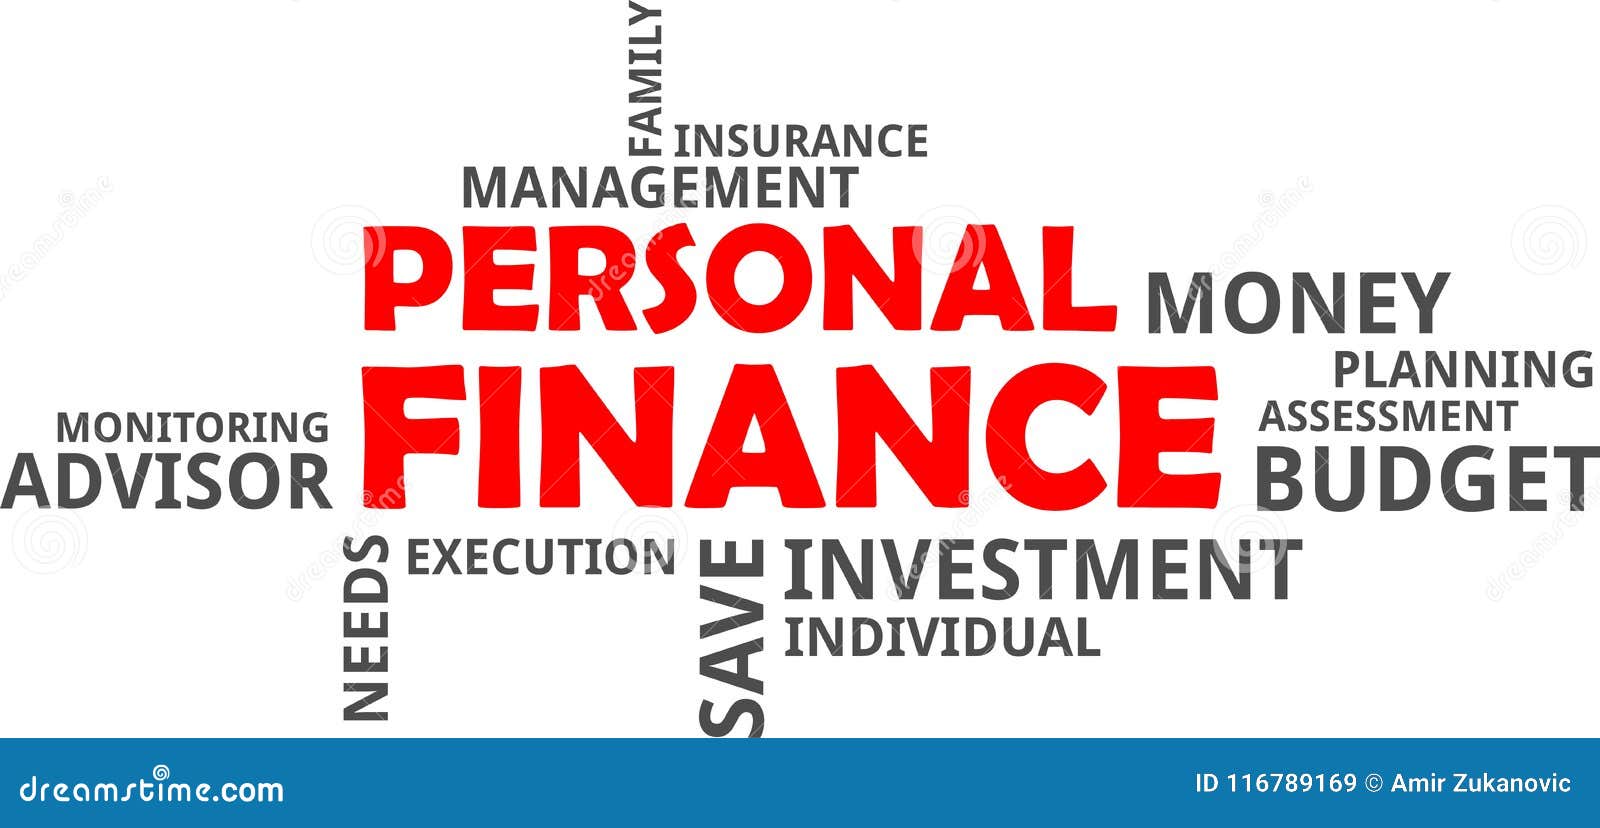 word-cloud-personal-finance-related-items-word-cloud-personal-finance-116789169.jpg